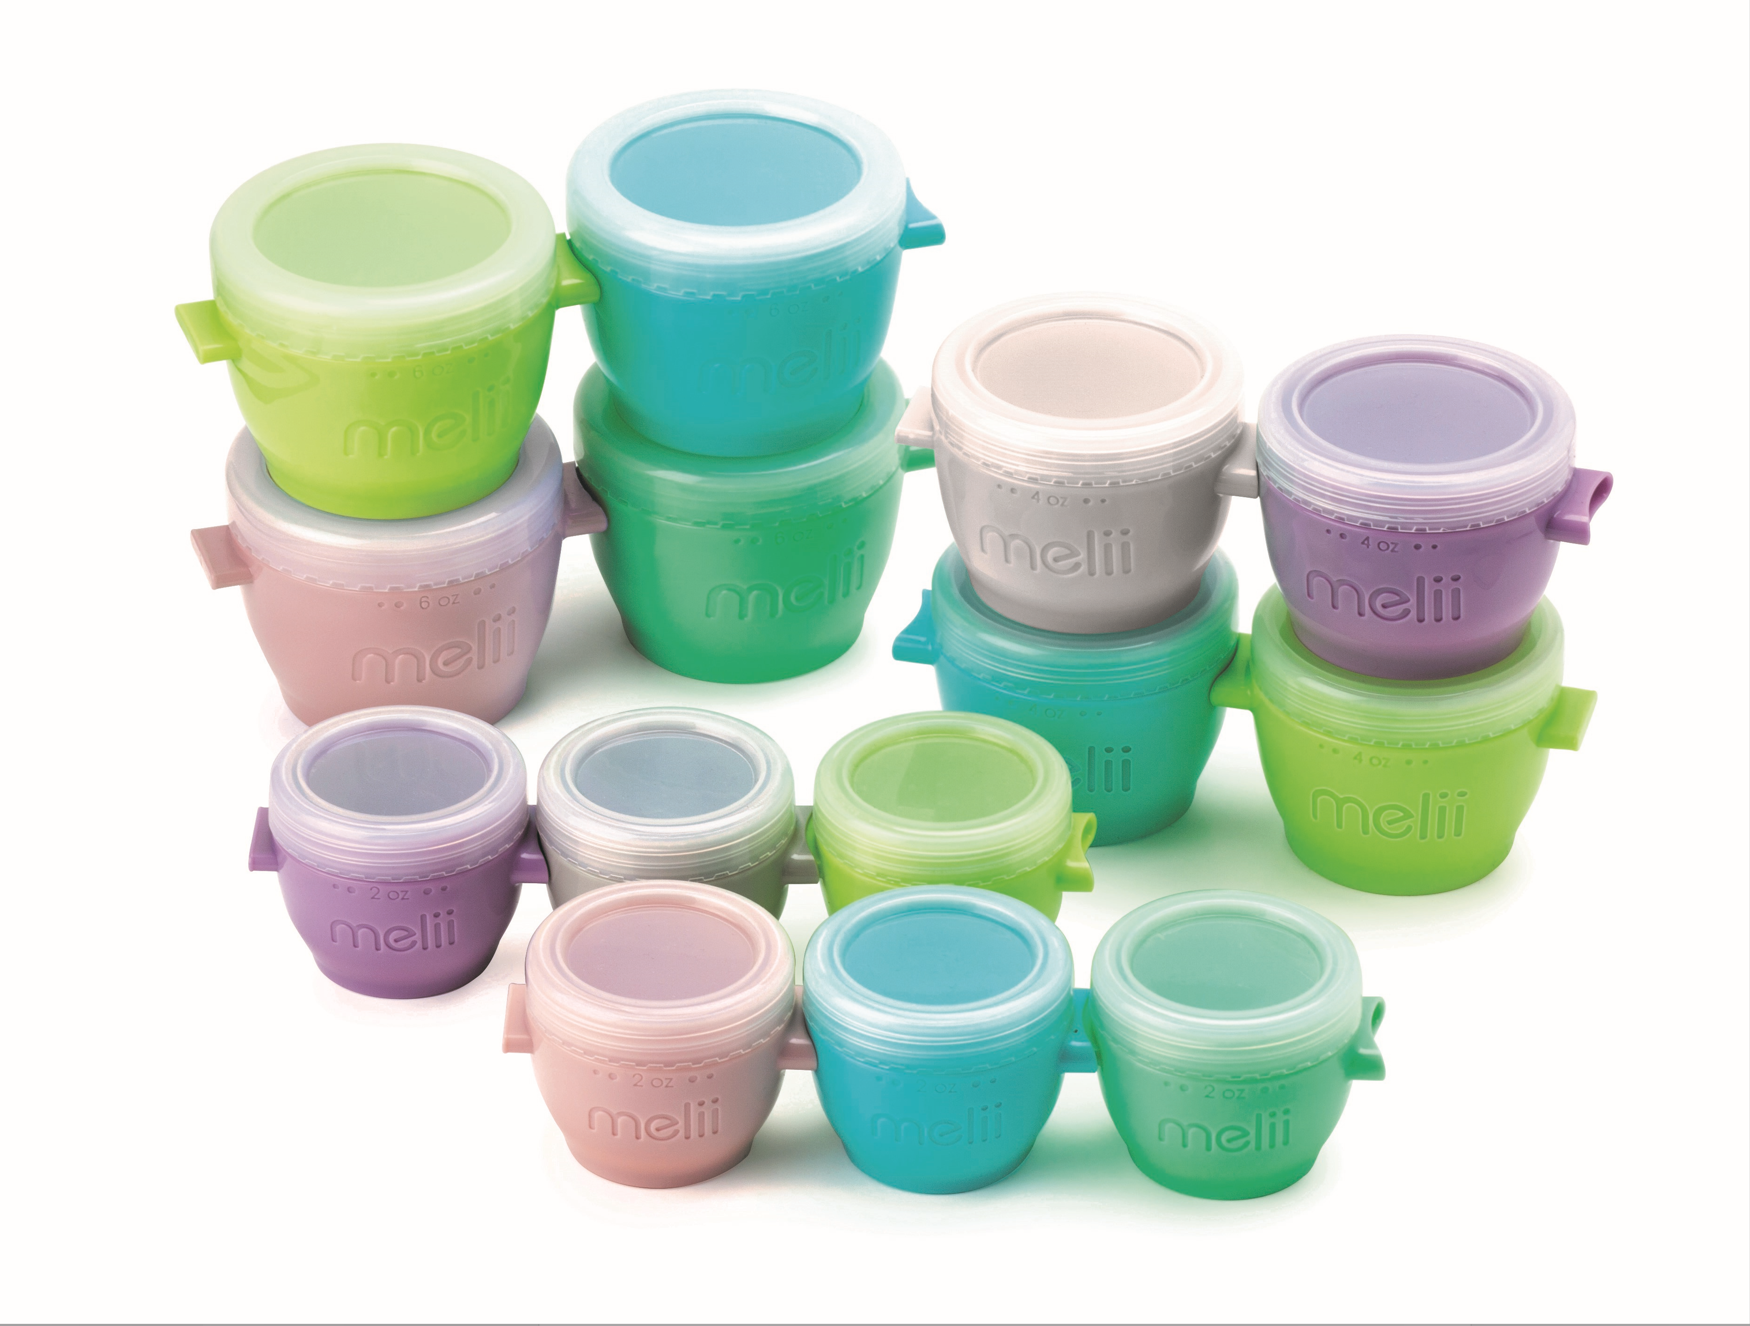 Softshell Snap-Close Silicone Food Storage Container Lime